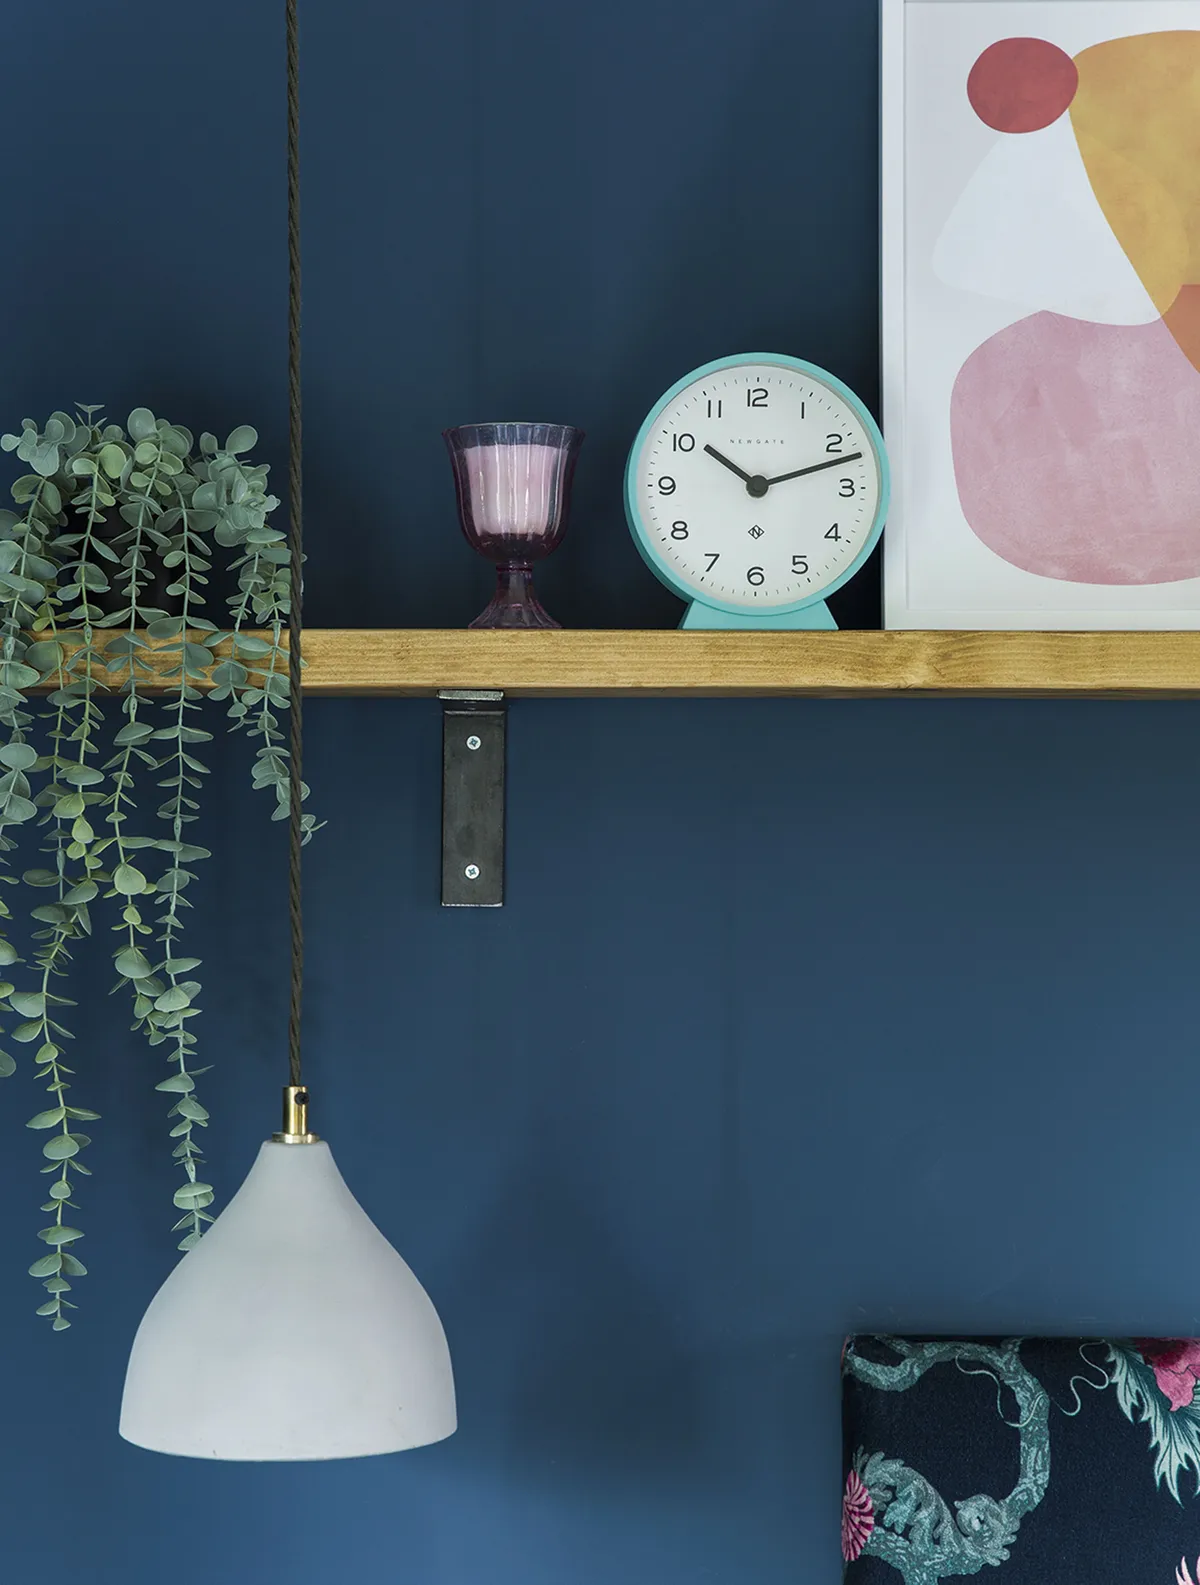 Recycled scaffold wood is used to create a striking shelf above the bed to display colourful prints, plants and Becky’s favourite accessories. Hanging ceiling pendants are a stylish option for bedside lighting